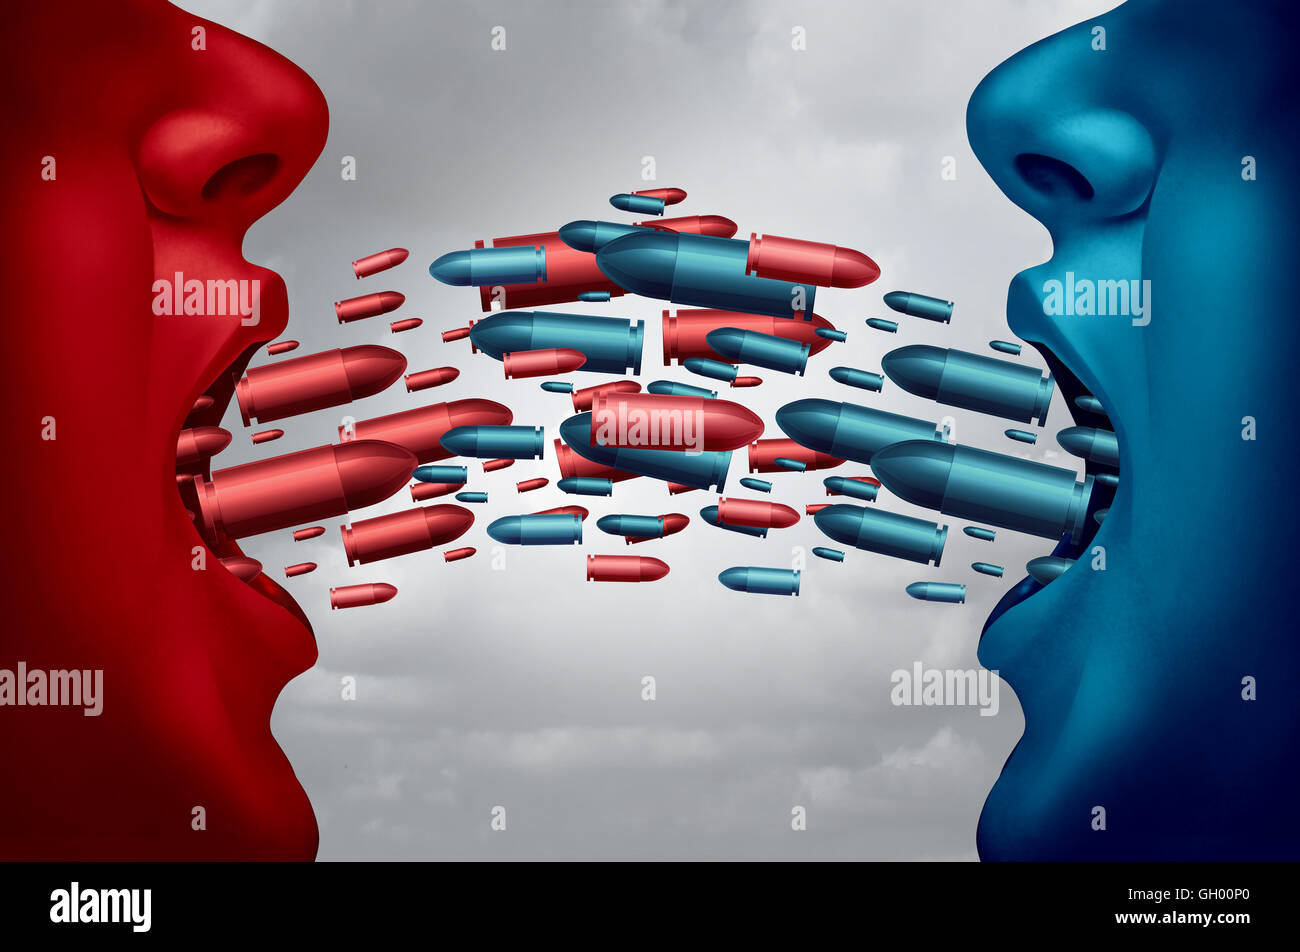 Concept of debate and political argument symbol as two opposing competitors debating and arguing with mouths open and symbolic bullets flying towards each other as an dispute metaphor with 3D illustration elements. Stock Photo